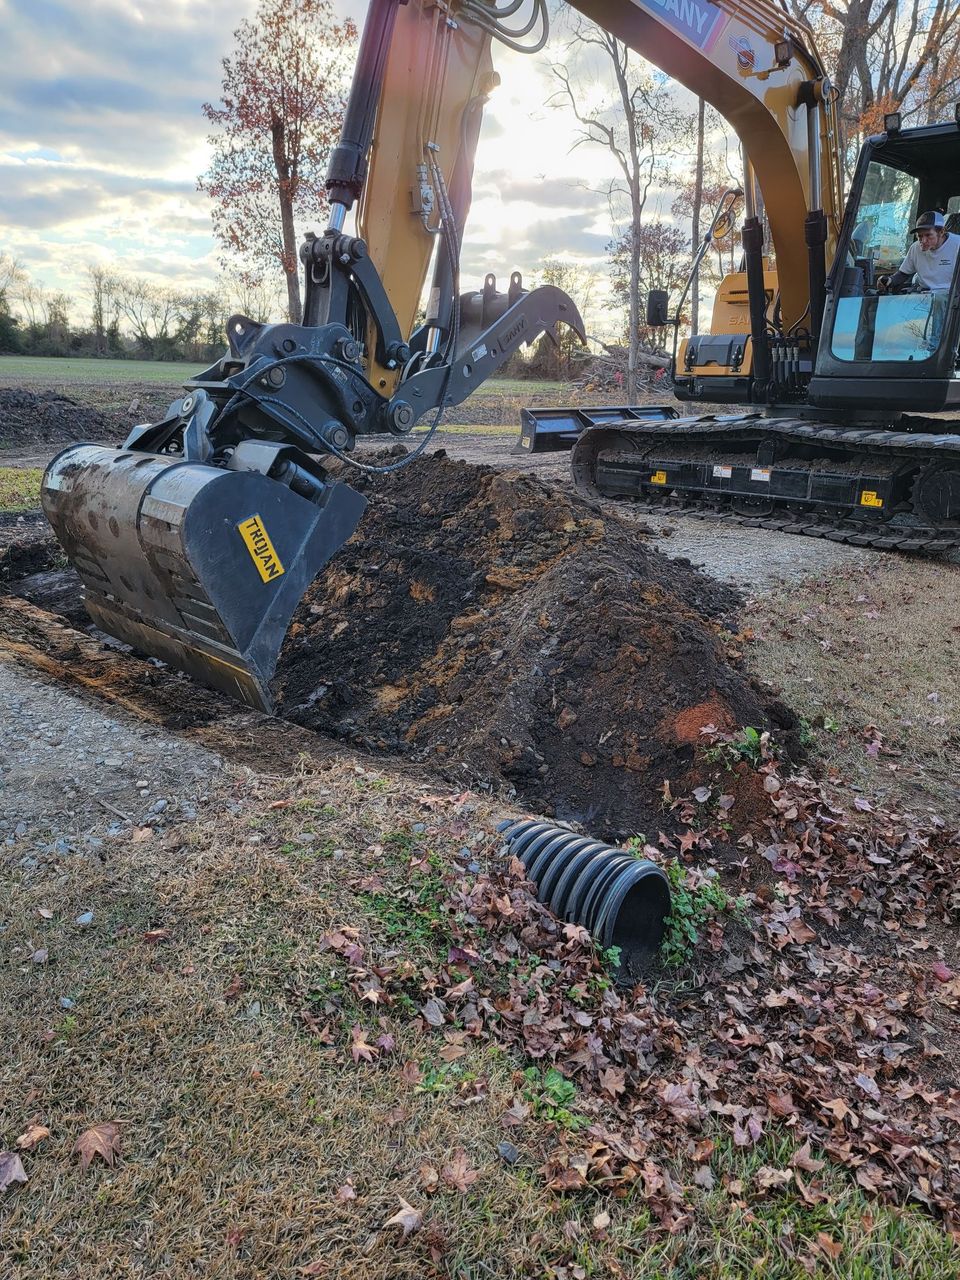 Storm Drain Installation in NC, Fayetteville NC storm drainage, storm drain installation